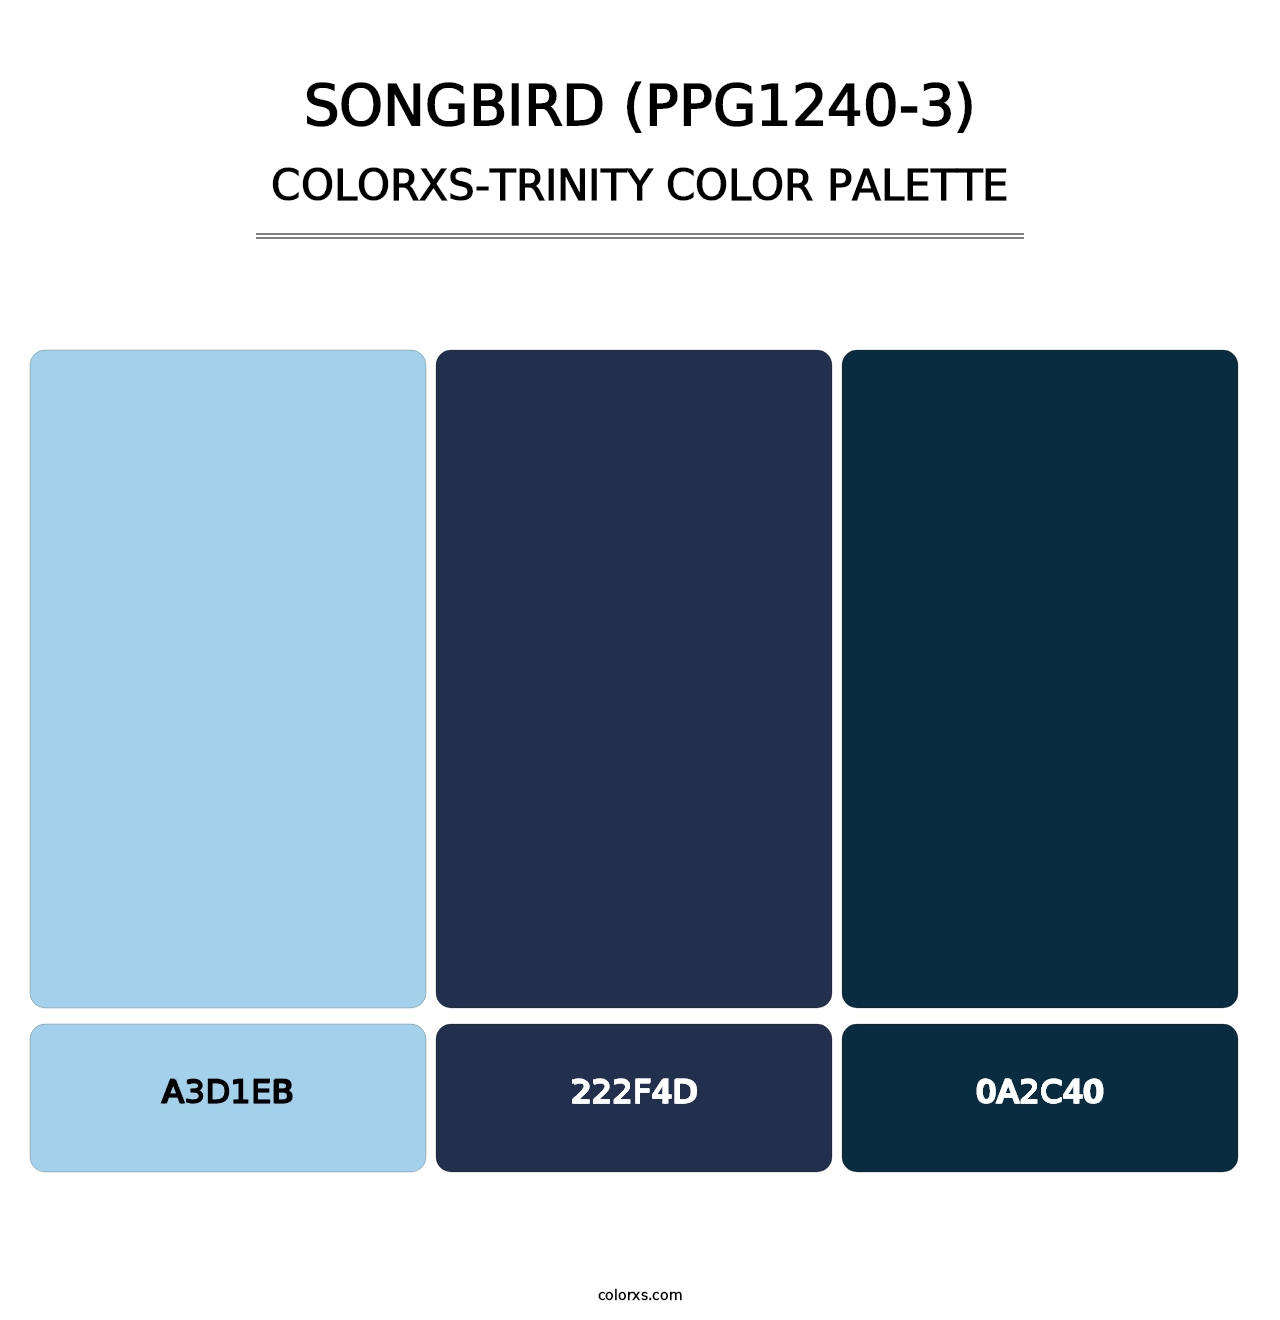 Songbird (PPG1240-3) - Colorxs Trinity Palette